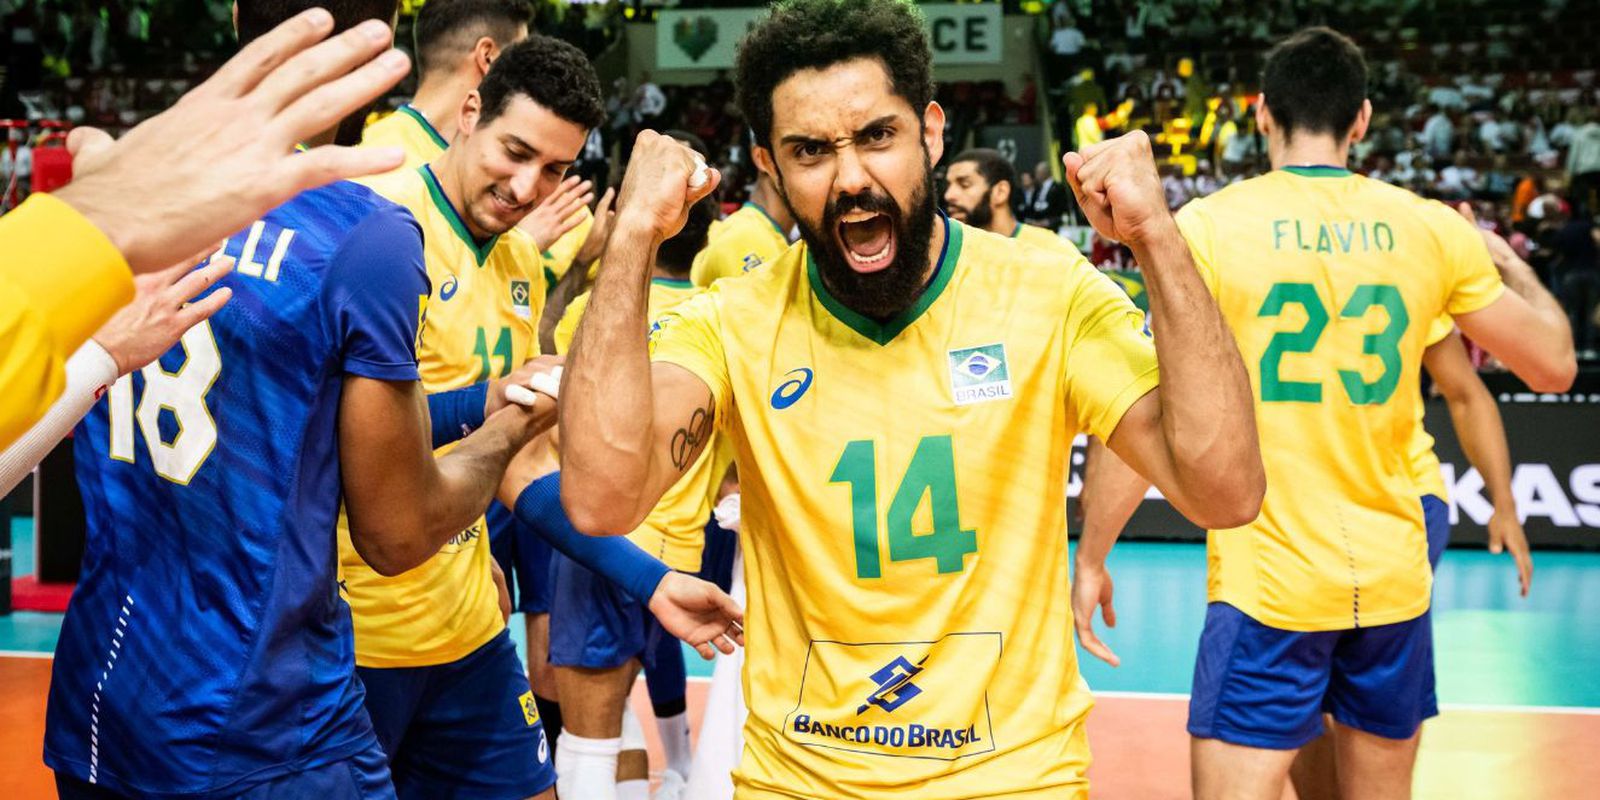 Brazil beats Slovenia and takes bronze at the Volleyball World Cup